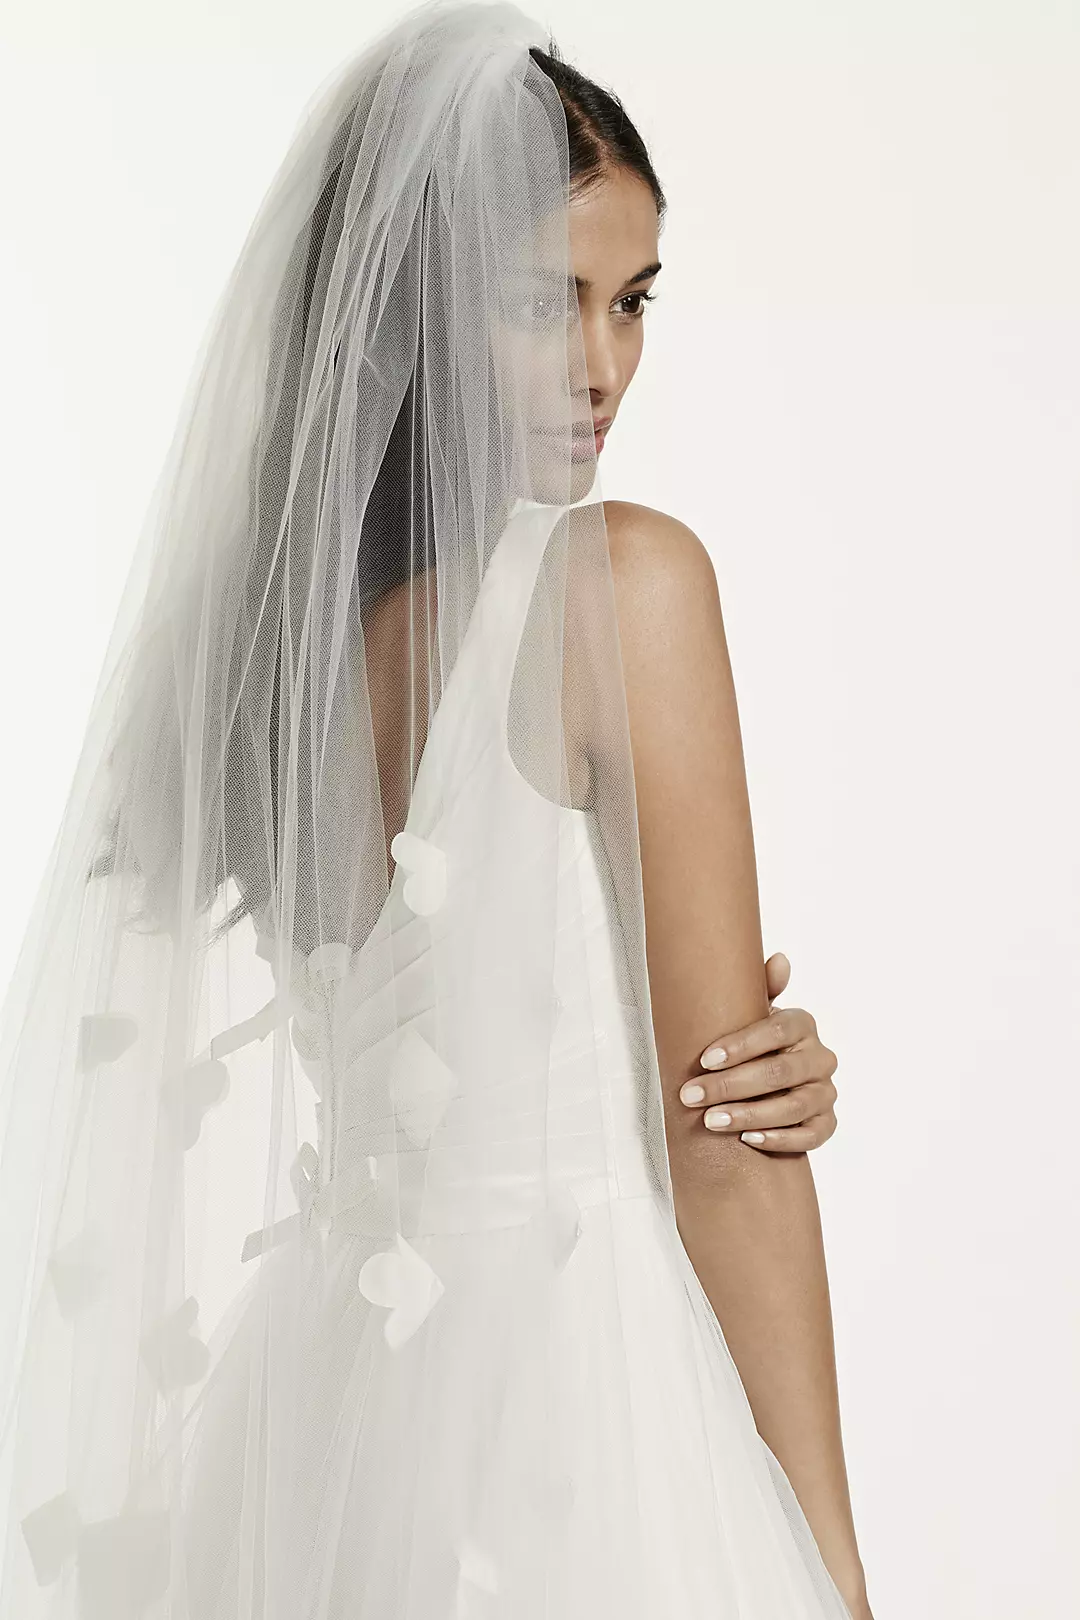 Cathedral Length Veil with Organza Floral Detail Image